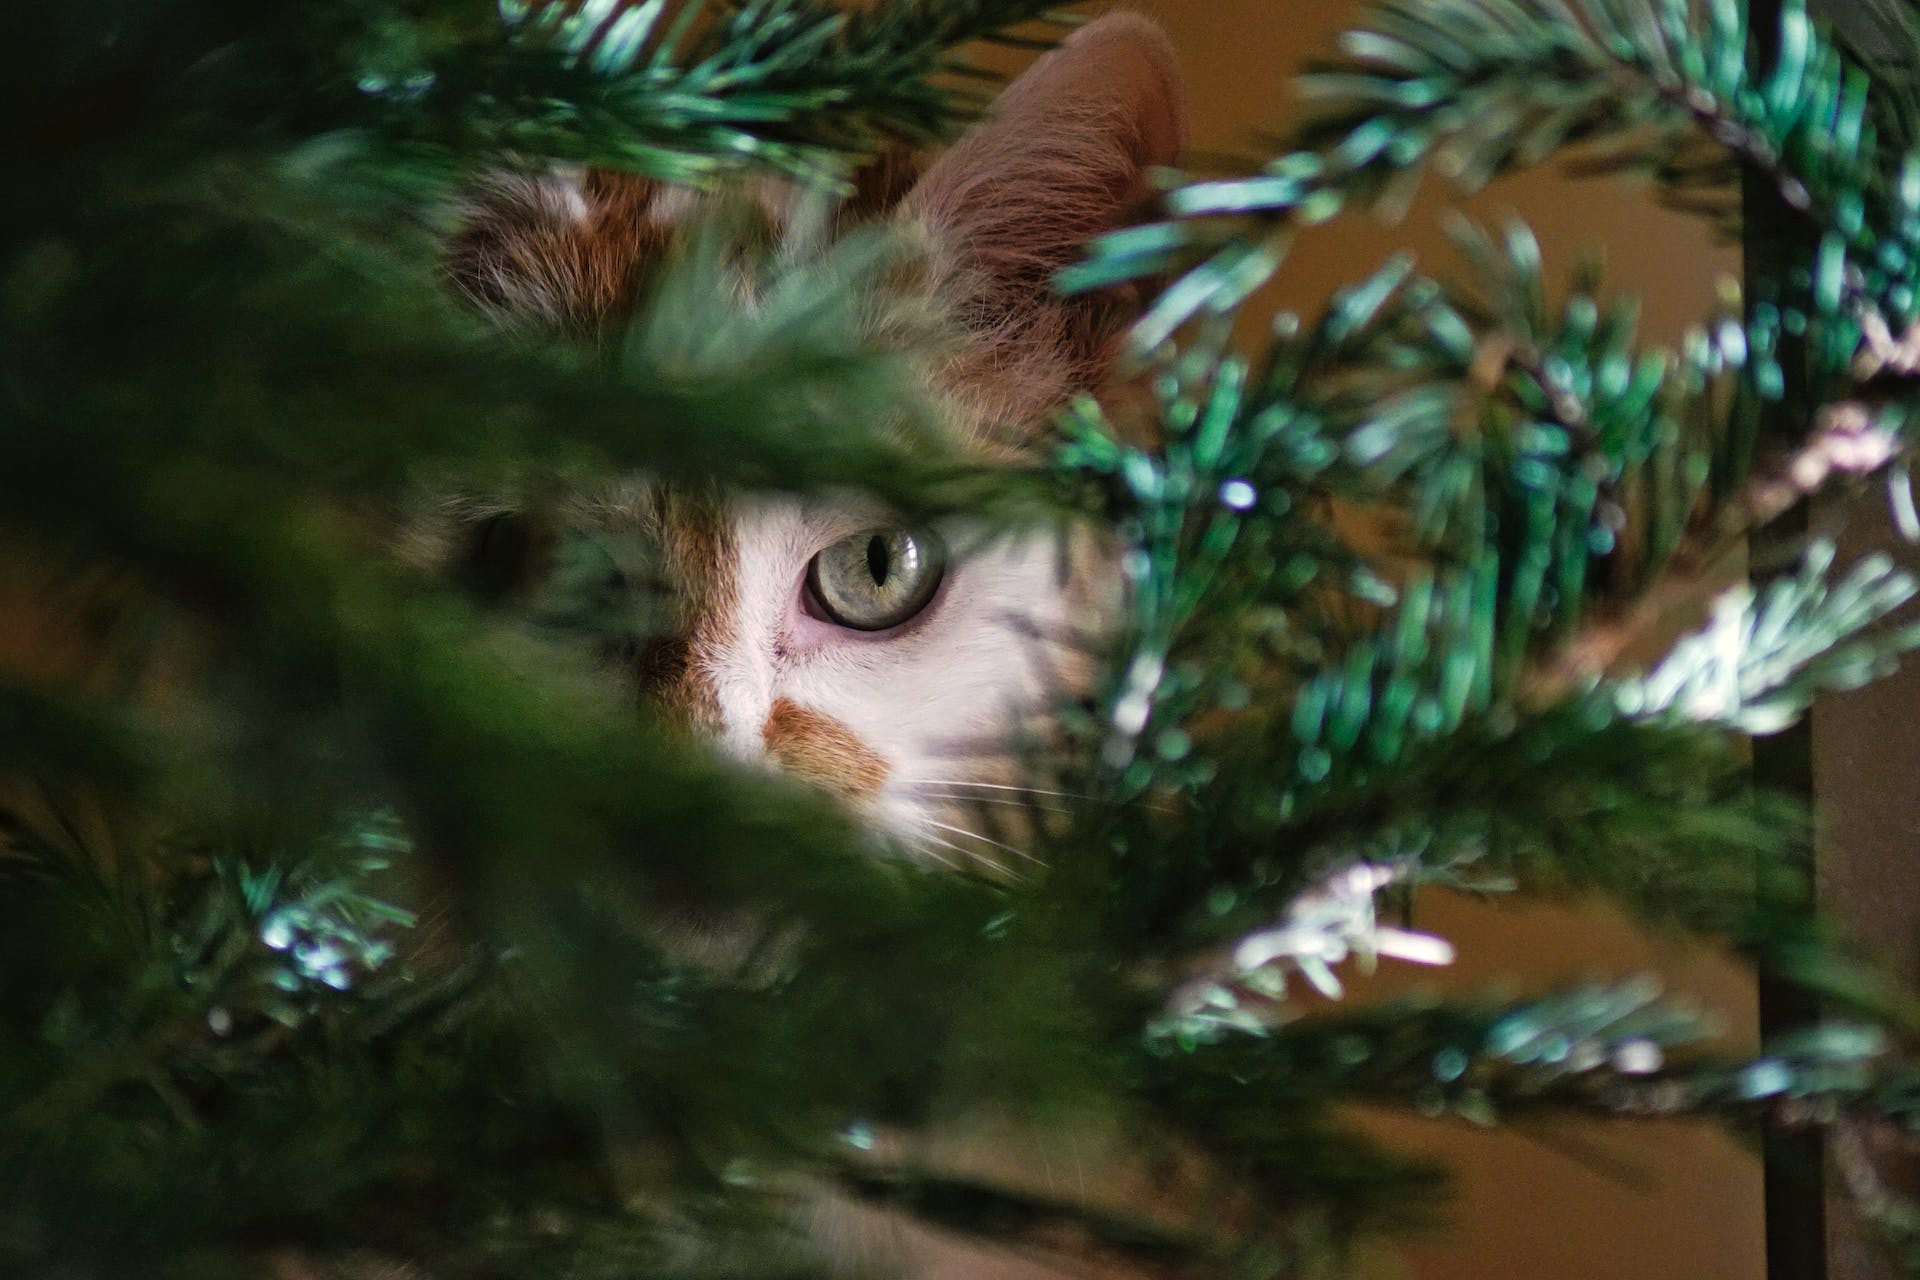 A cat hiding behind a pine tree branch